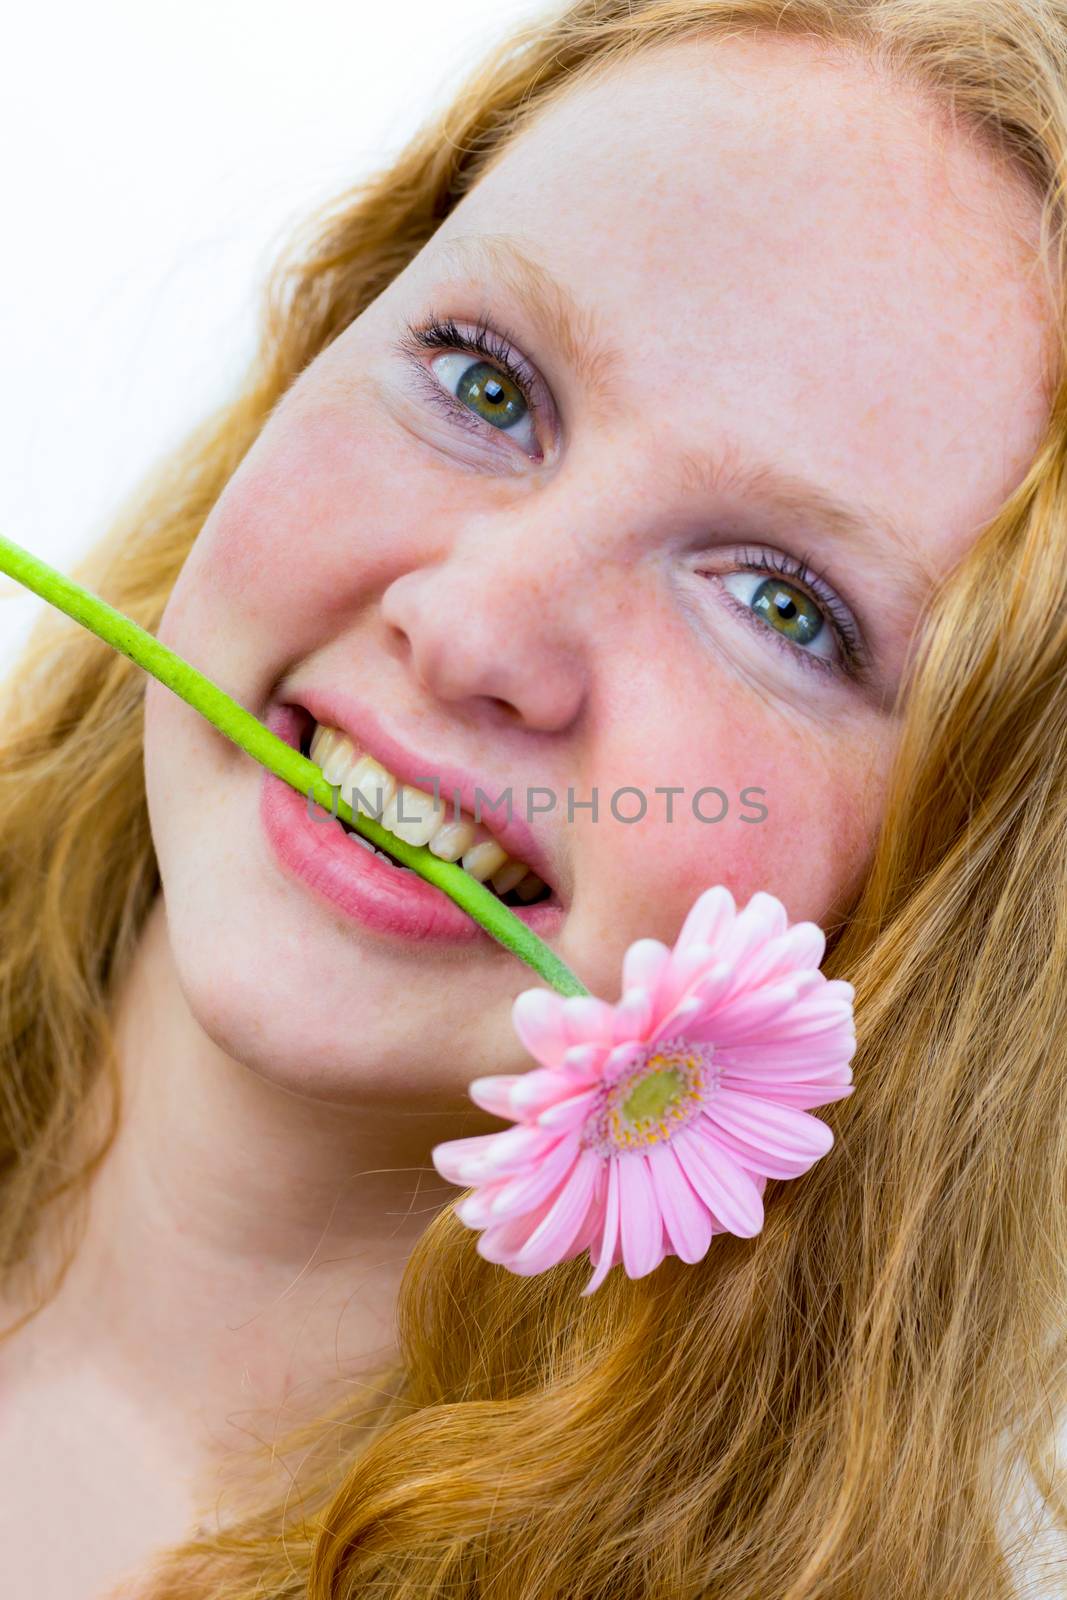 Face of girl with pink flower in her mouth by BenSchonewille